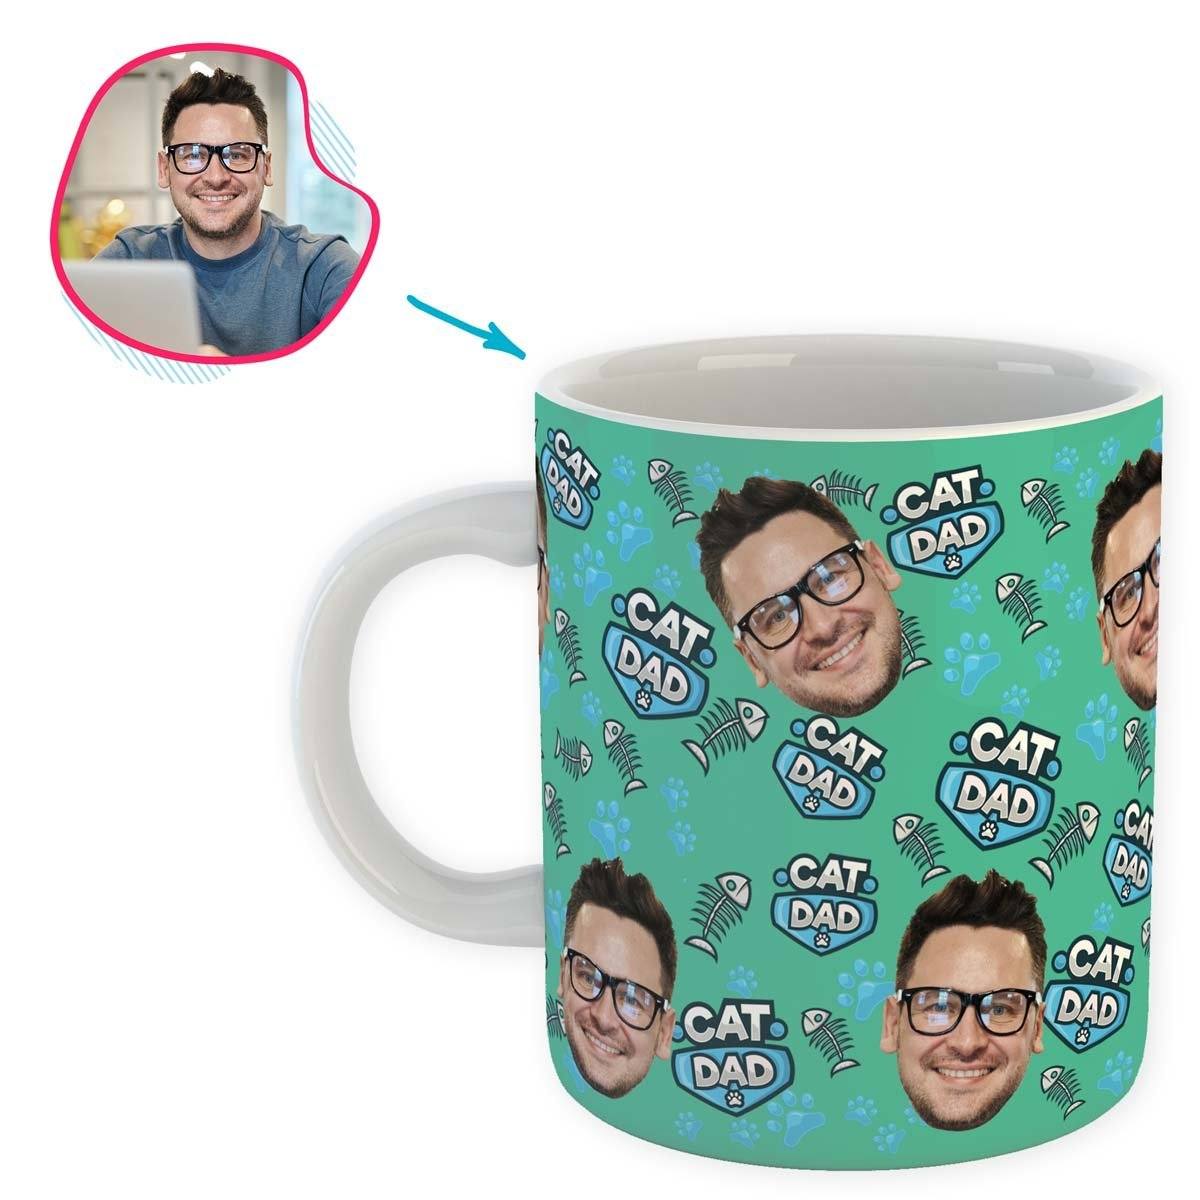 mint Cat Dad mug personalized with photo of face printed on it